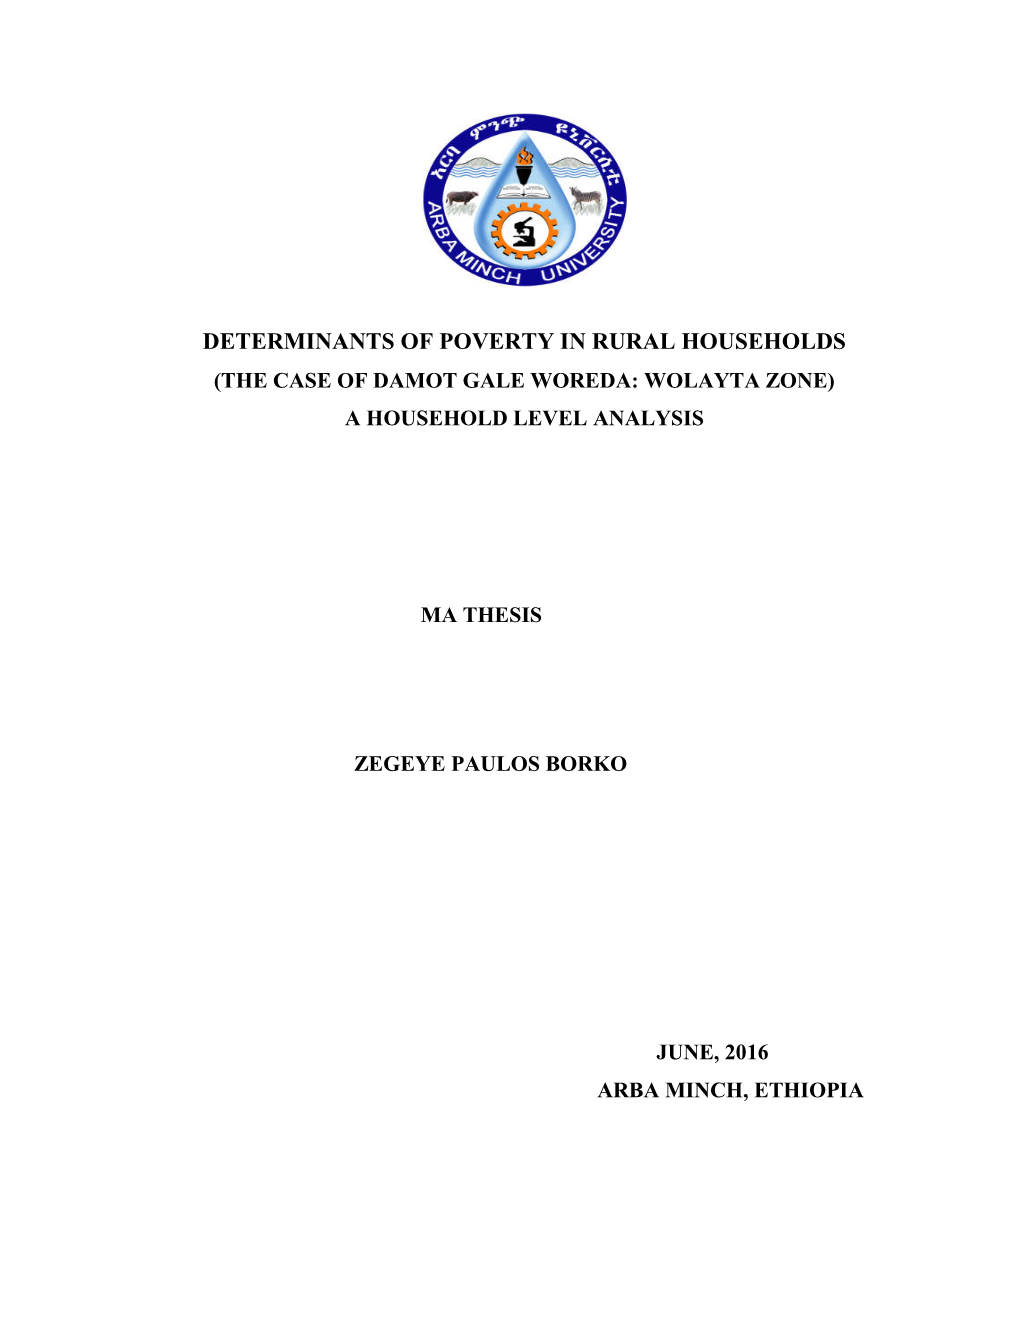 Determinants of Poverty in Rural Households (The Case of Damot Gale Woreda: Wolayta Zone) a Household Level Analysis